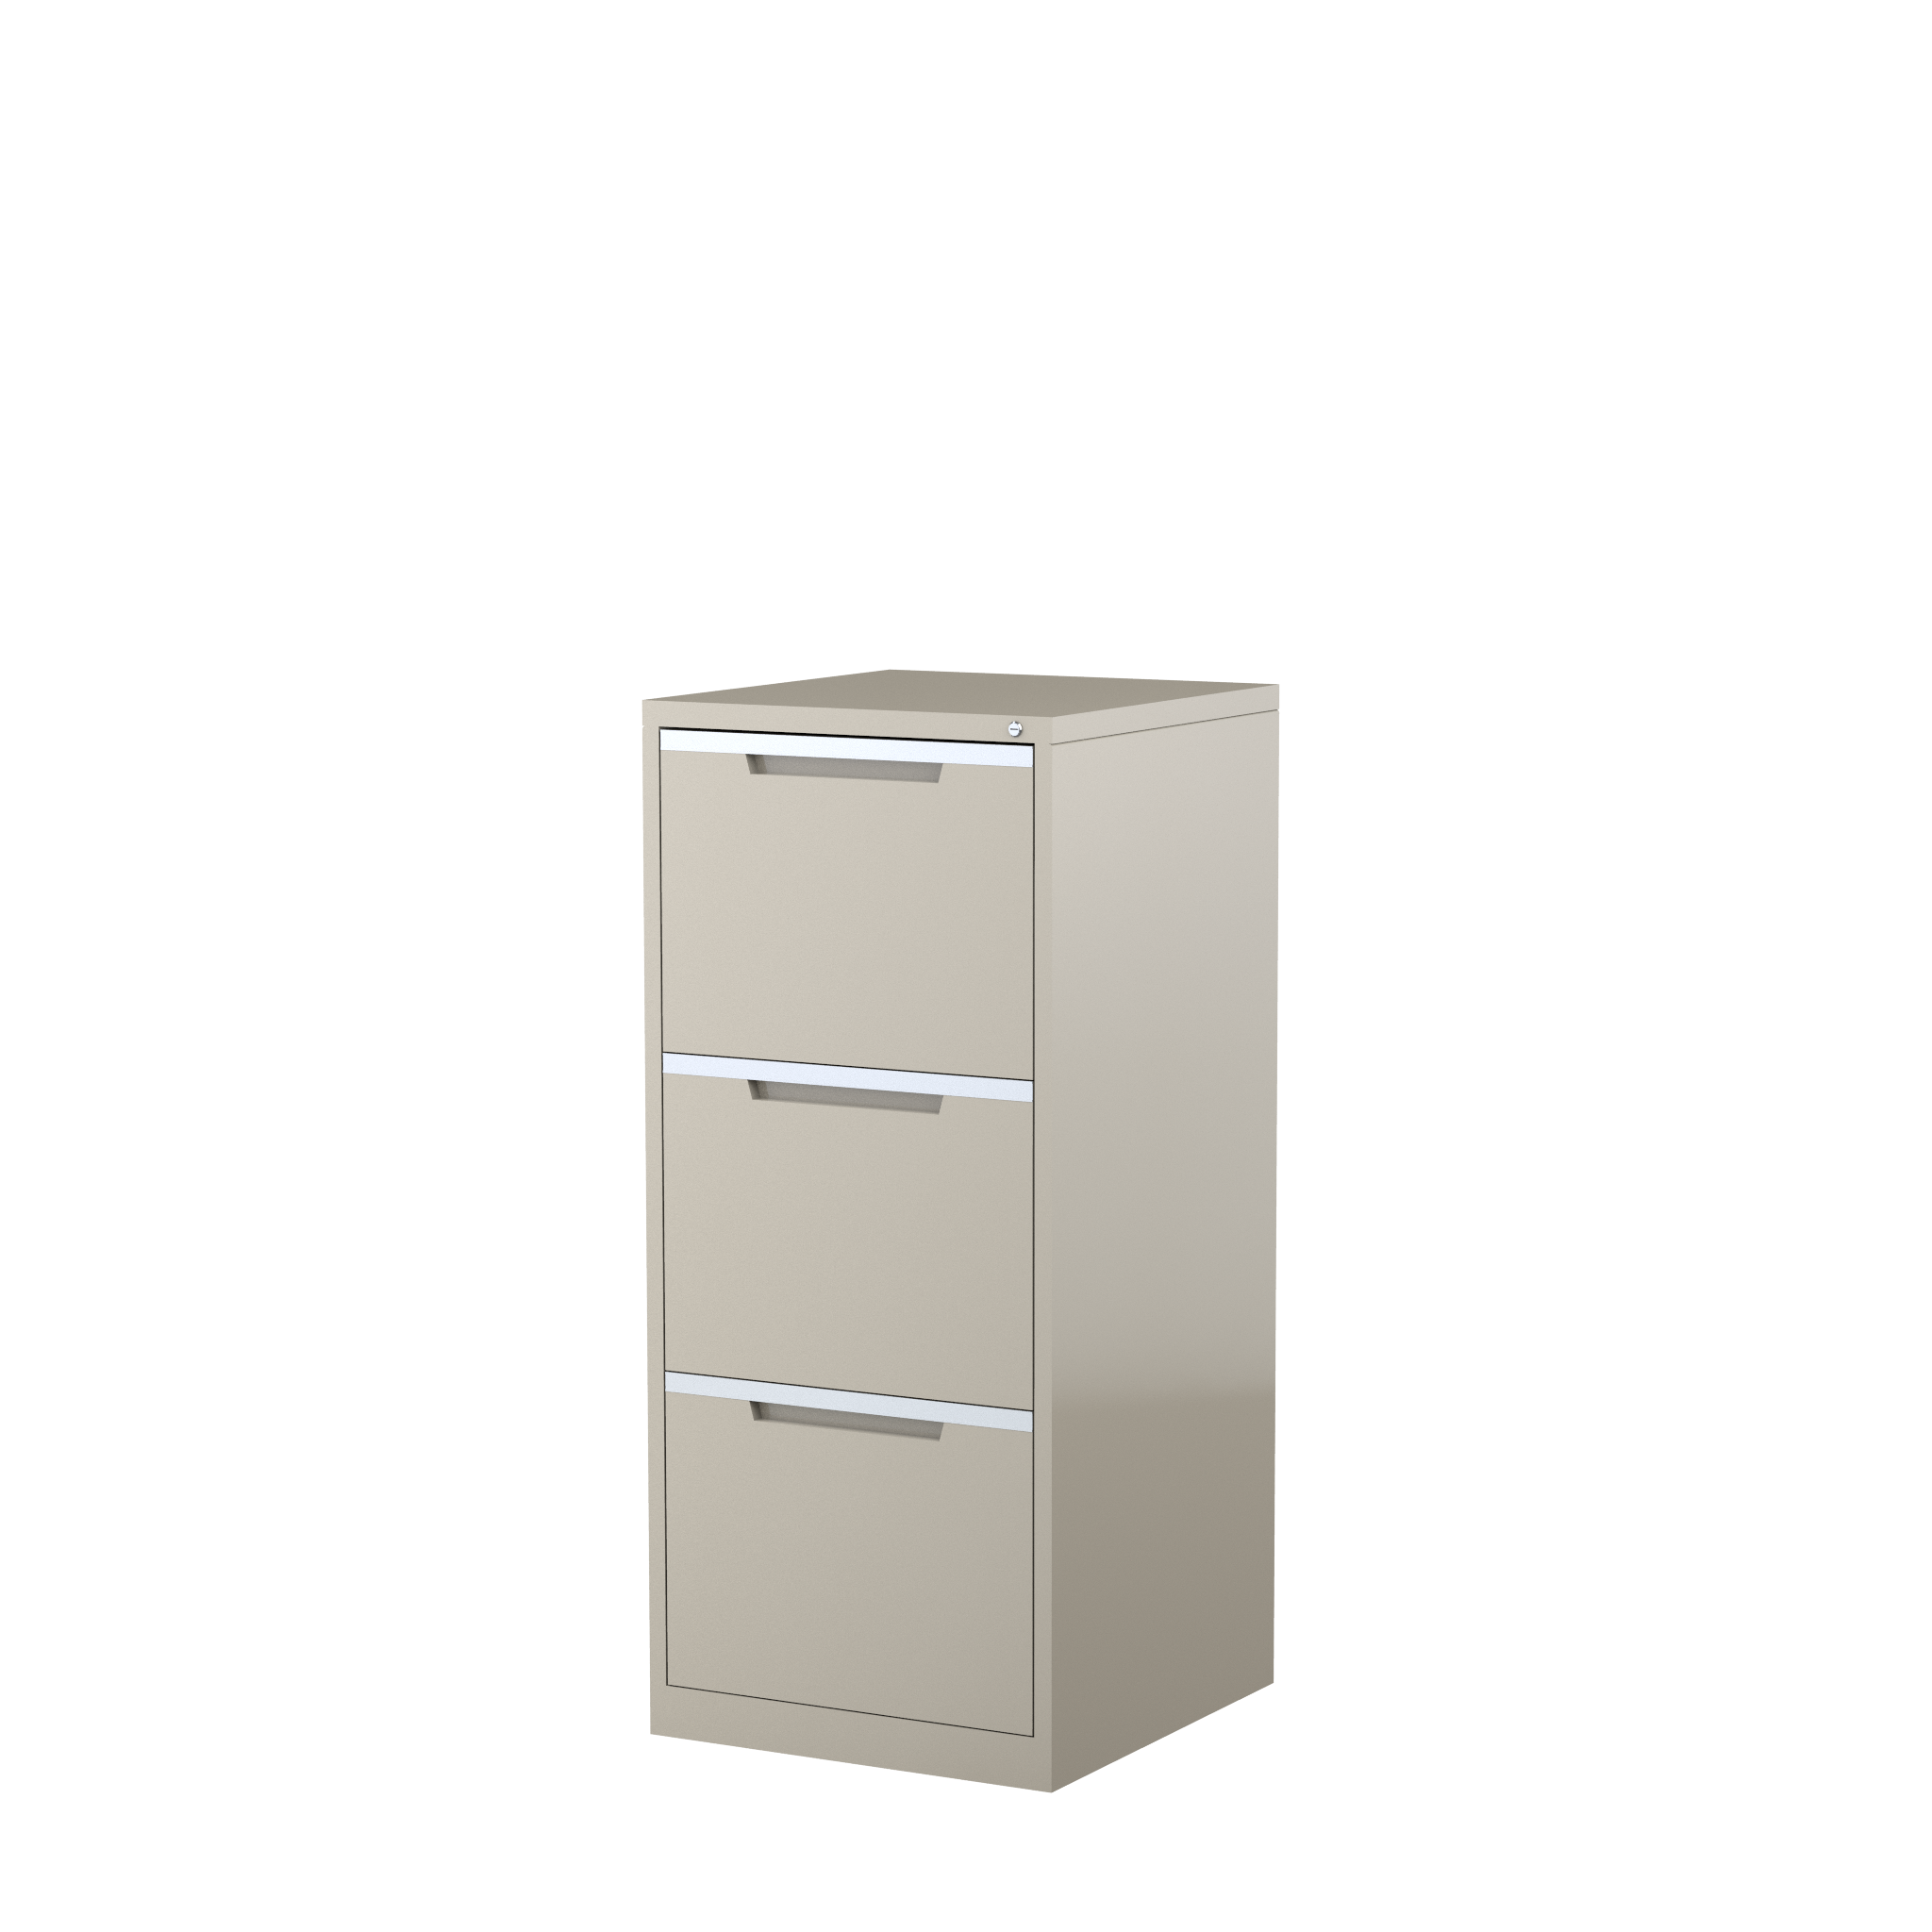 VFA3 - STEELCO A3 - 3 Drawer VFC 1320H x 580W x 620D-BG.png